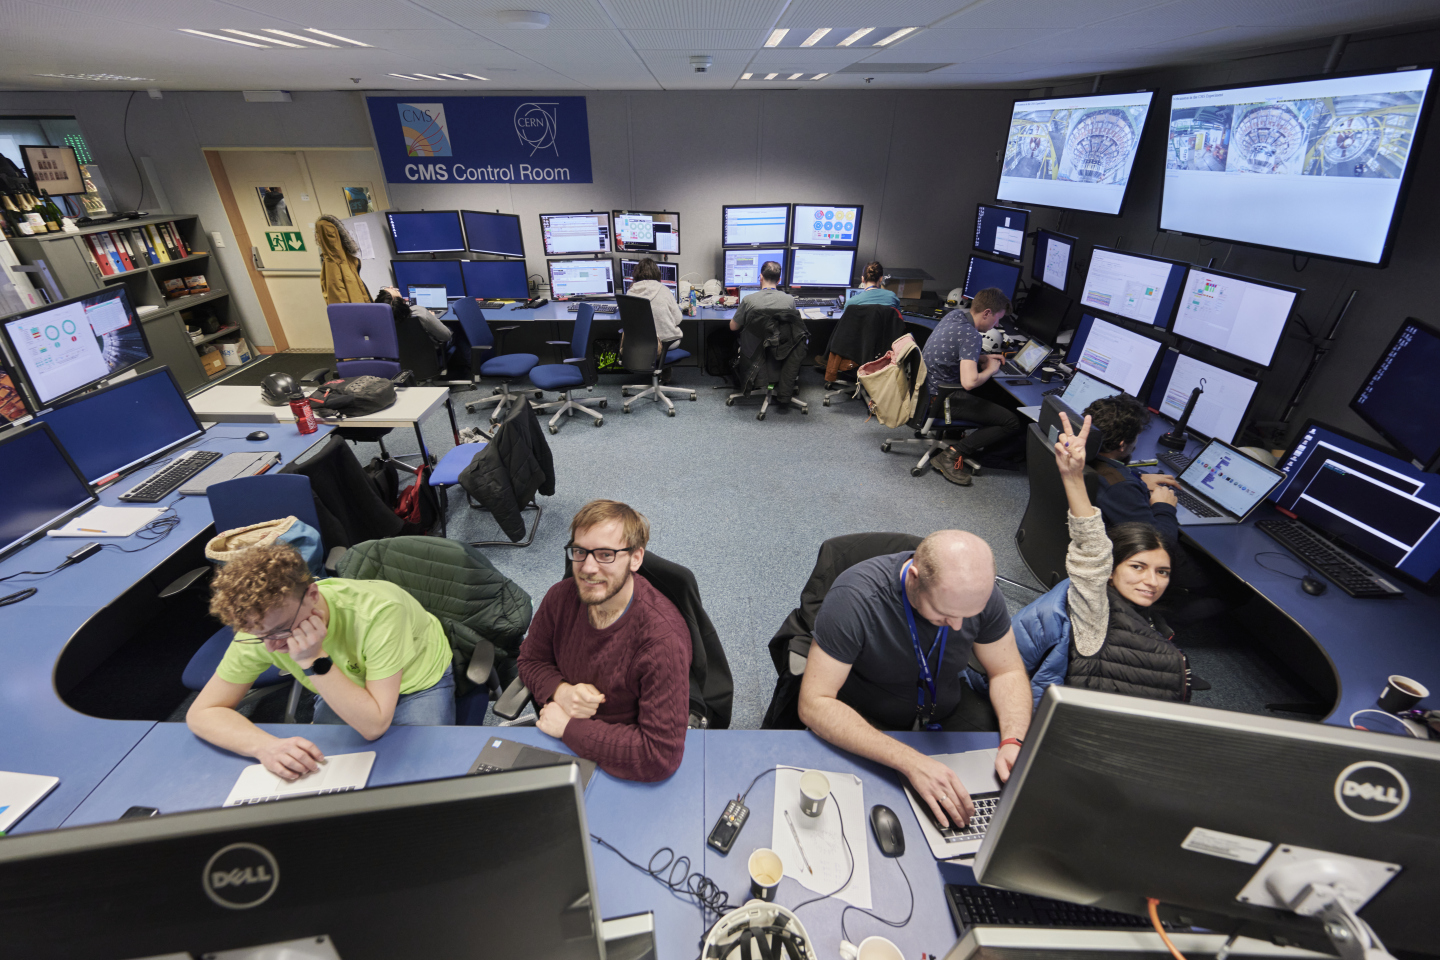 CMS Control Room during data taking campaigns before pandemic restrictions. Credit: CERN, Ordan, Julien